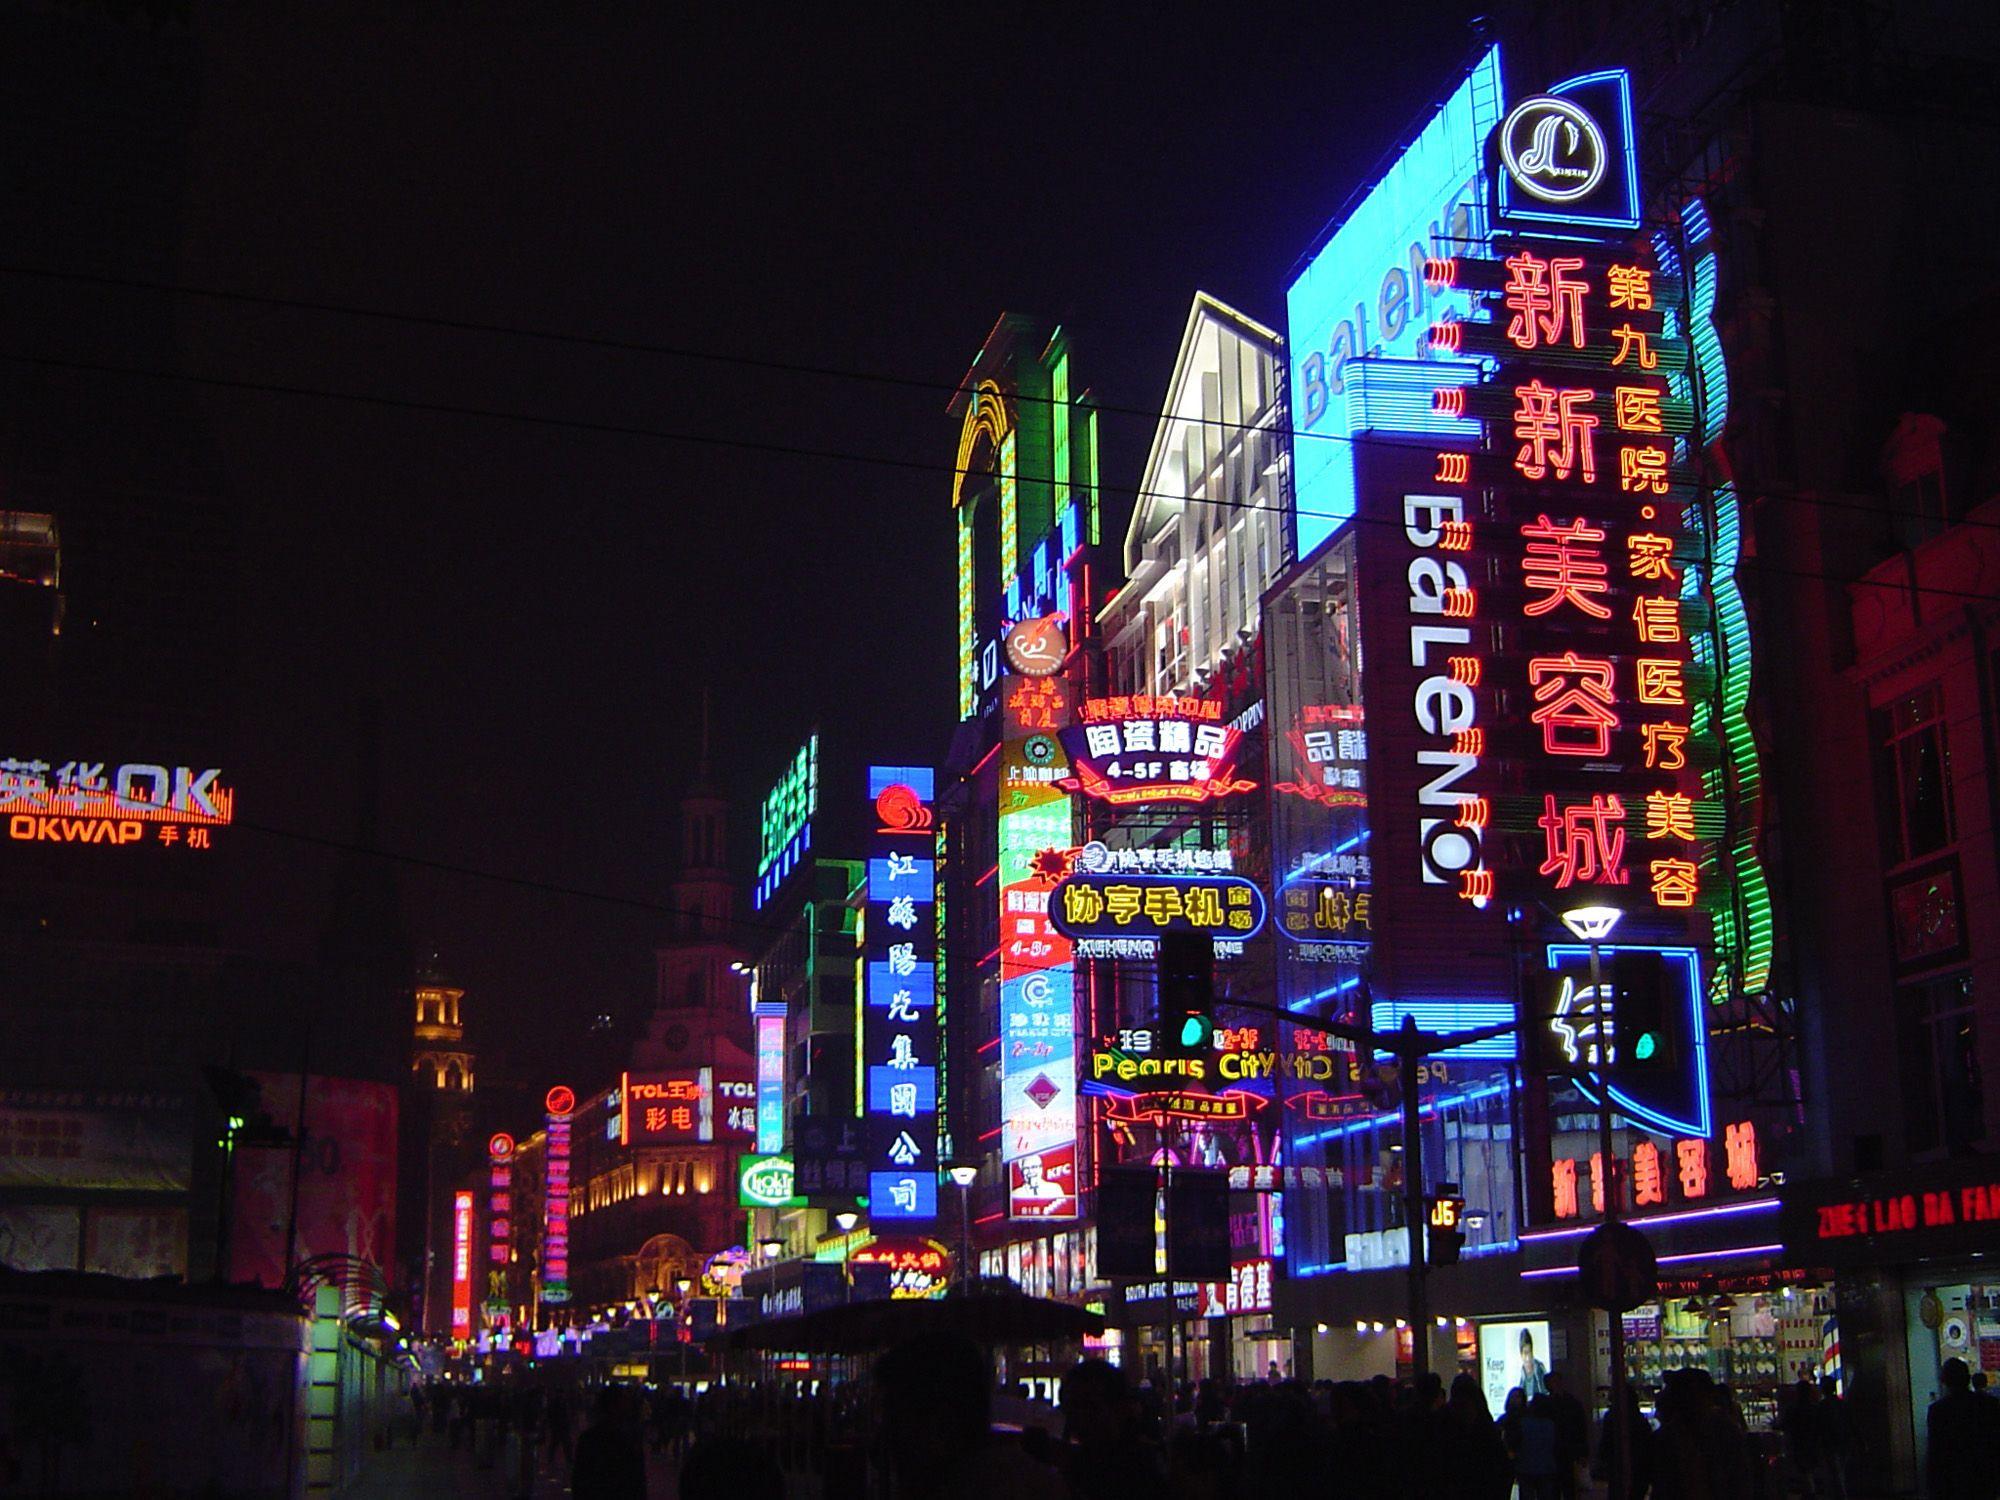 Free image of Commercial street with bright neon lights